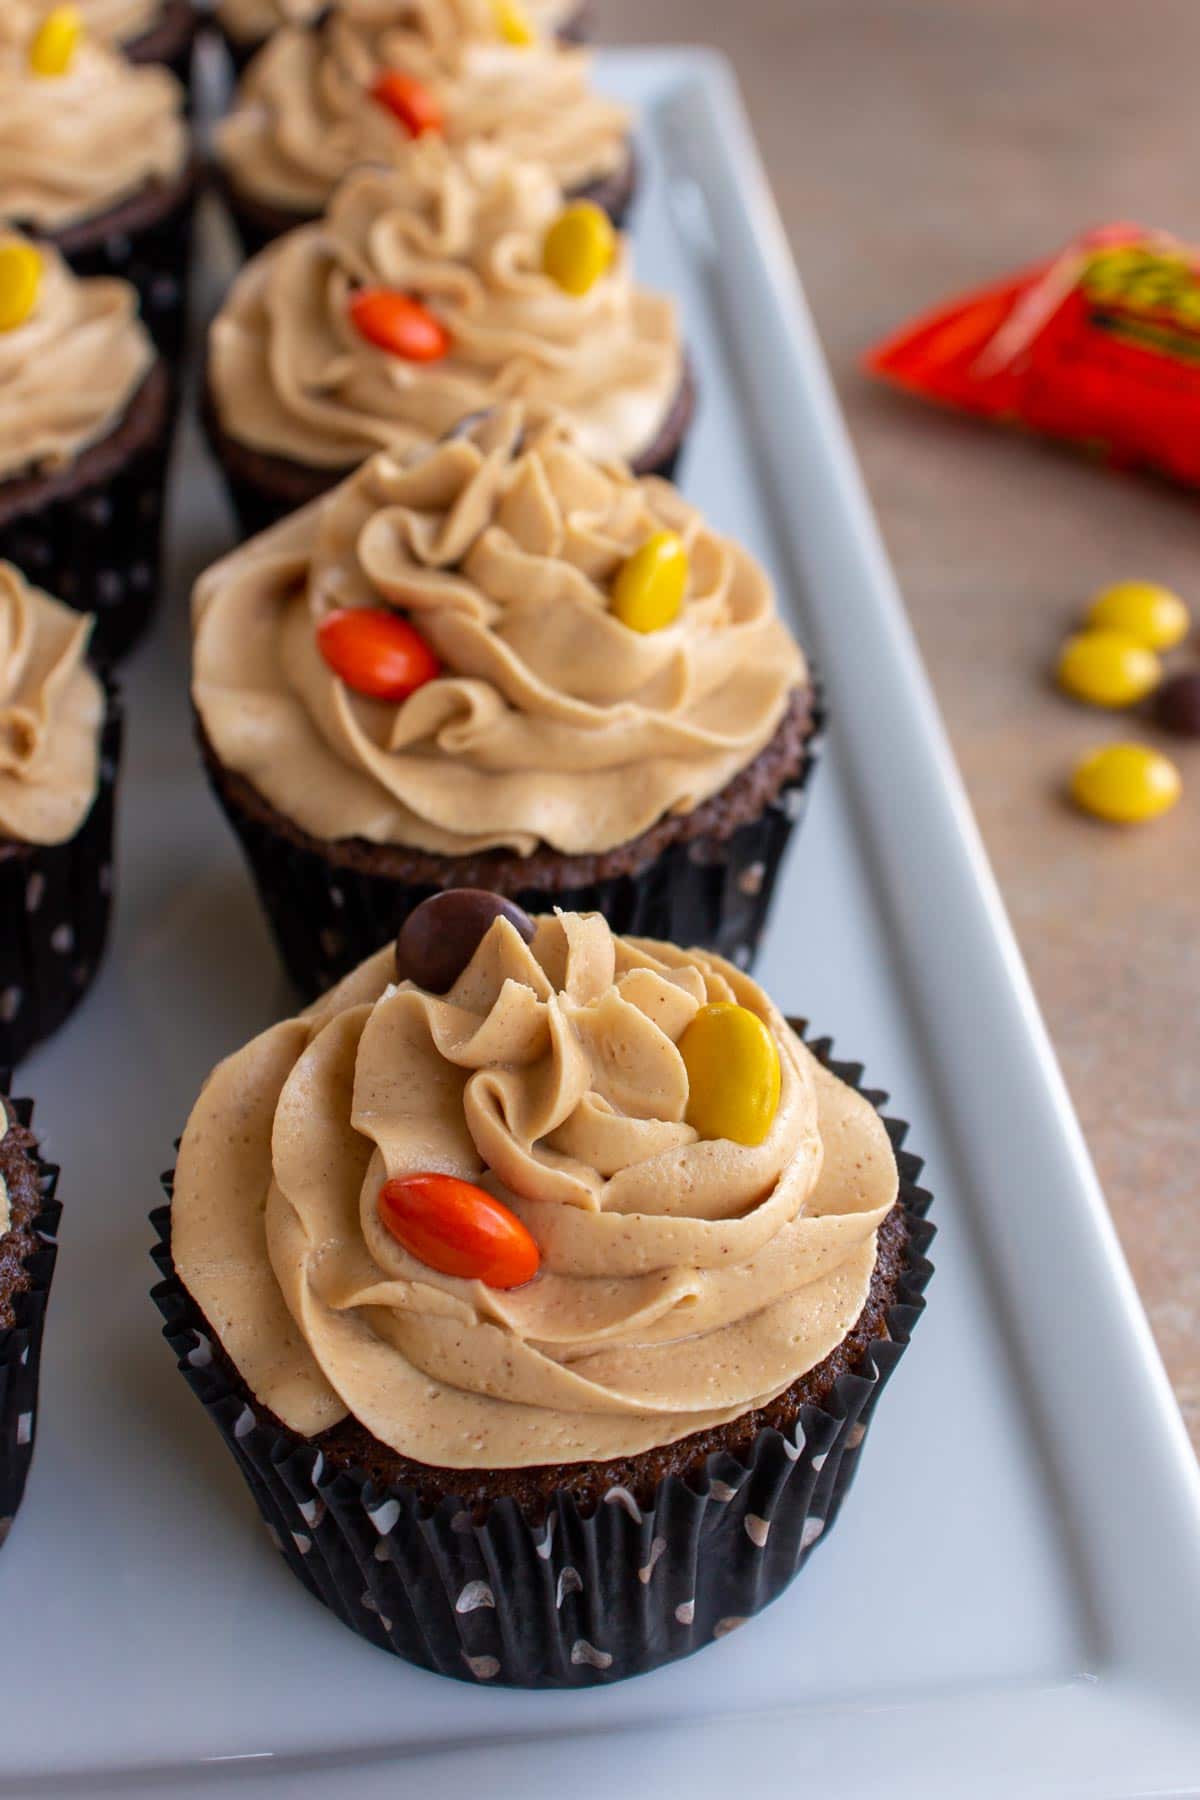 A row of Reese's cupcakes topped with Reese's Pieces candies on a white rectangular plate.